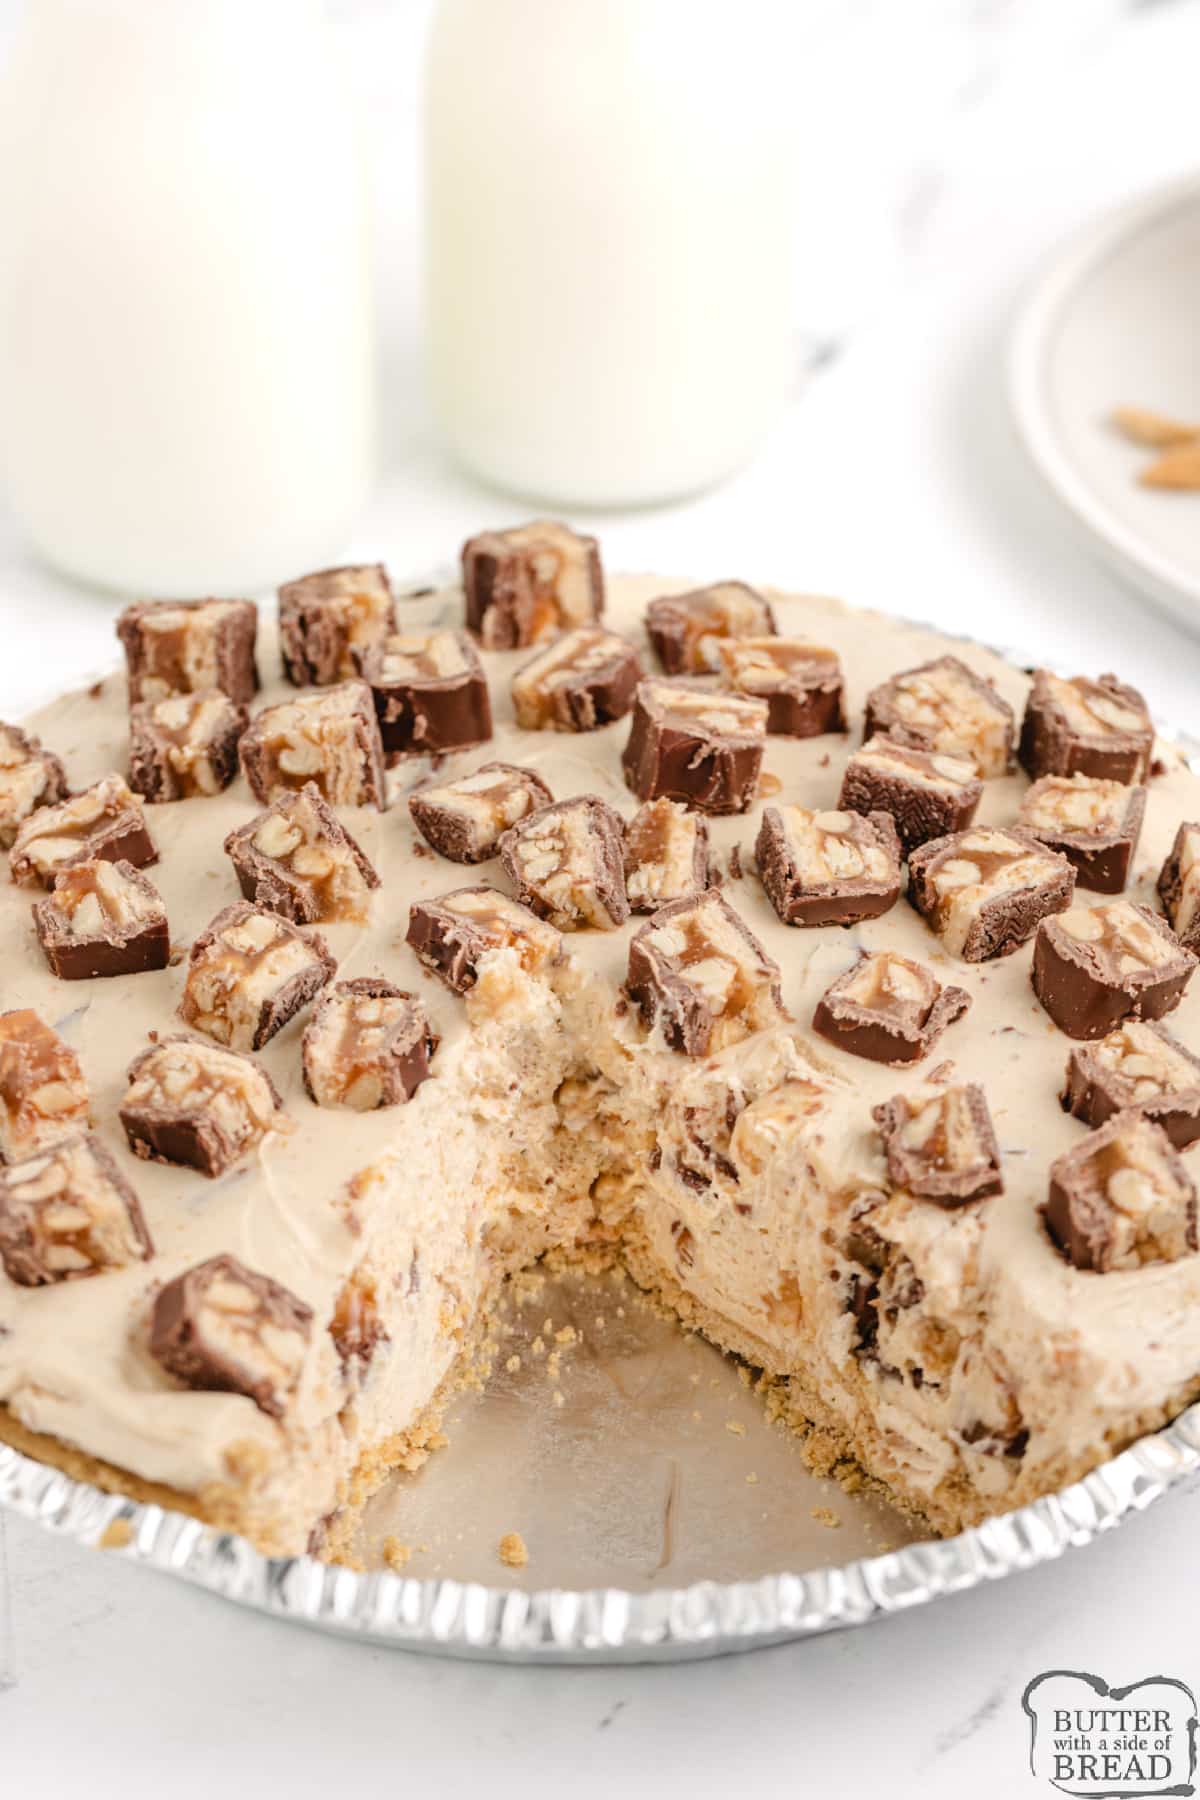 No Bake Snickers Pie is made with 6 ingredients in less than 5 minutes of prep time. Deliciously creamy no bake peanut butter pie recipe!